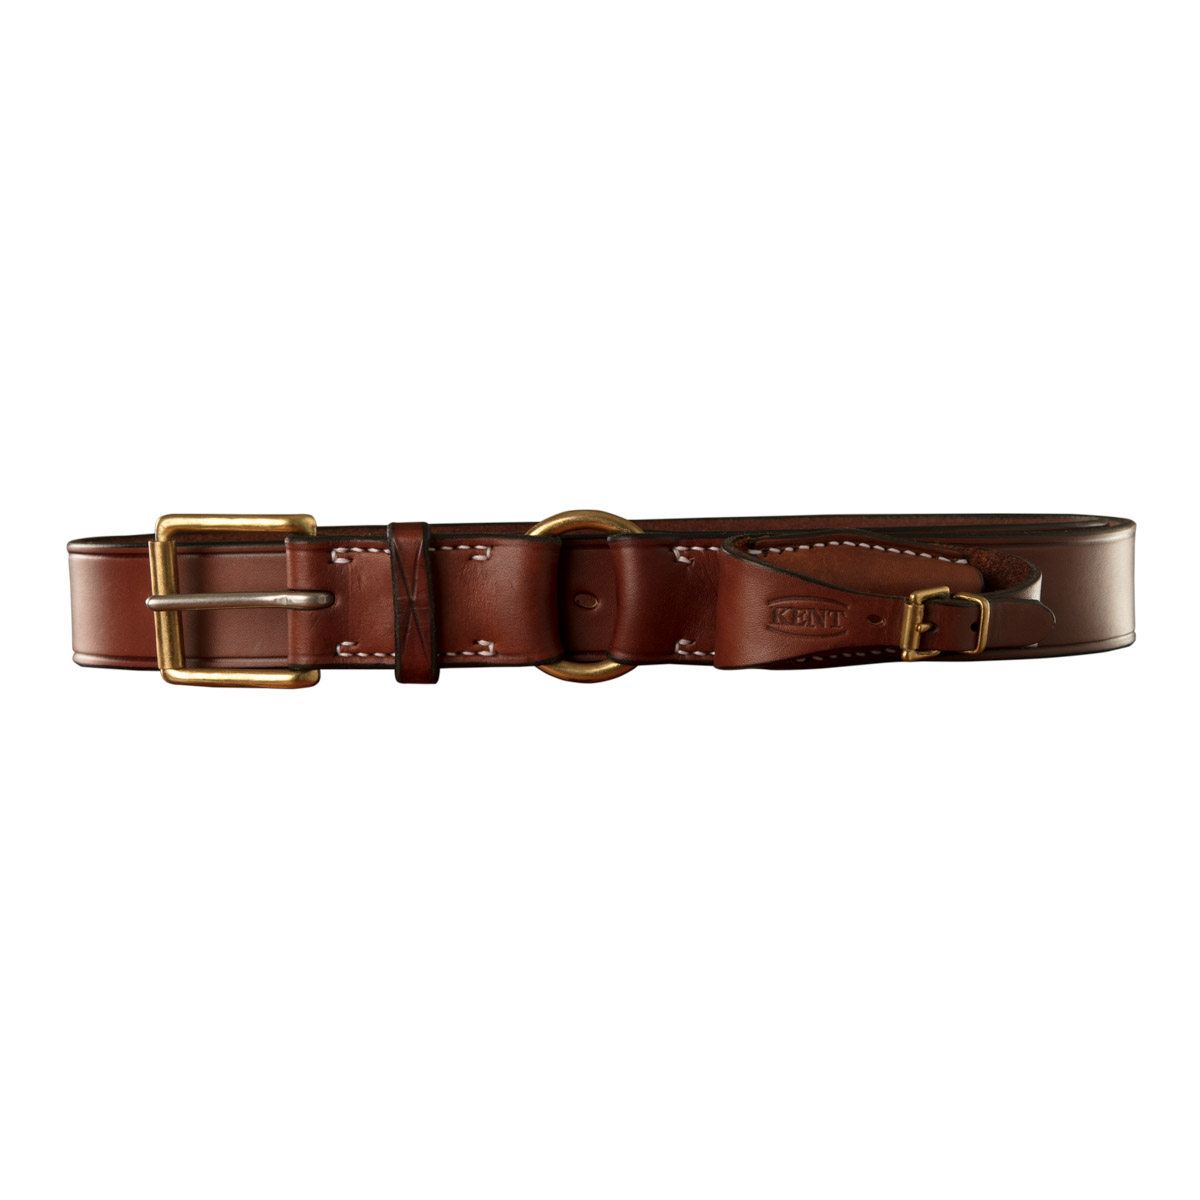 Stockmans Belt, Solid Leather, with Brass Roller Buckle, Ring and Pouch for Pocket Knife 1